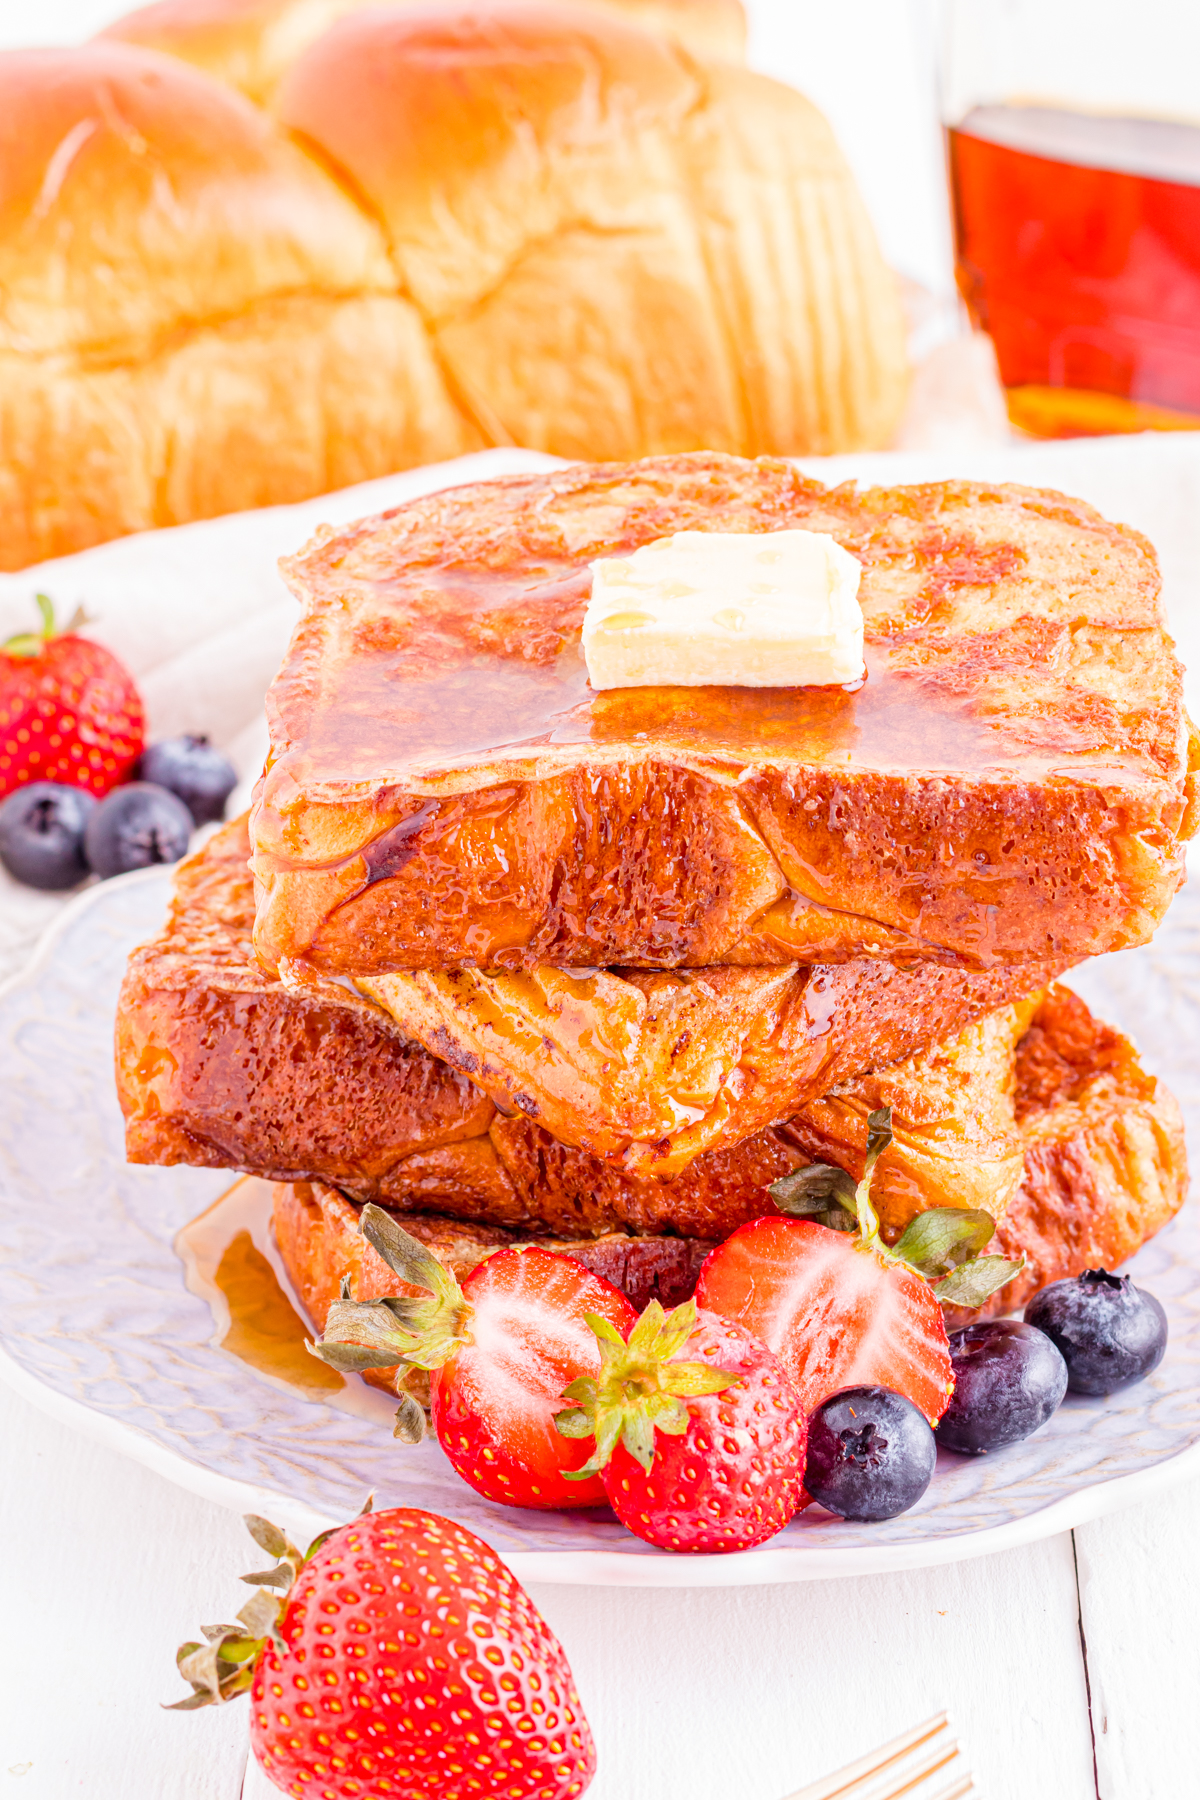 Brioche french toast on plate with berries.